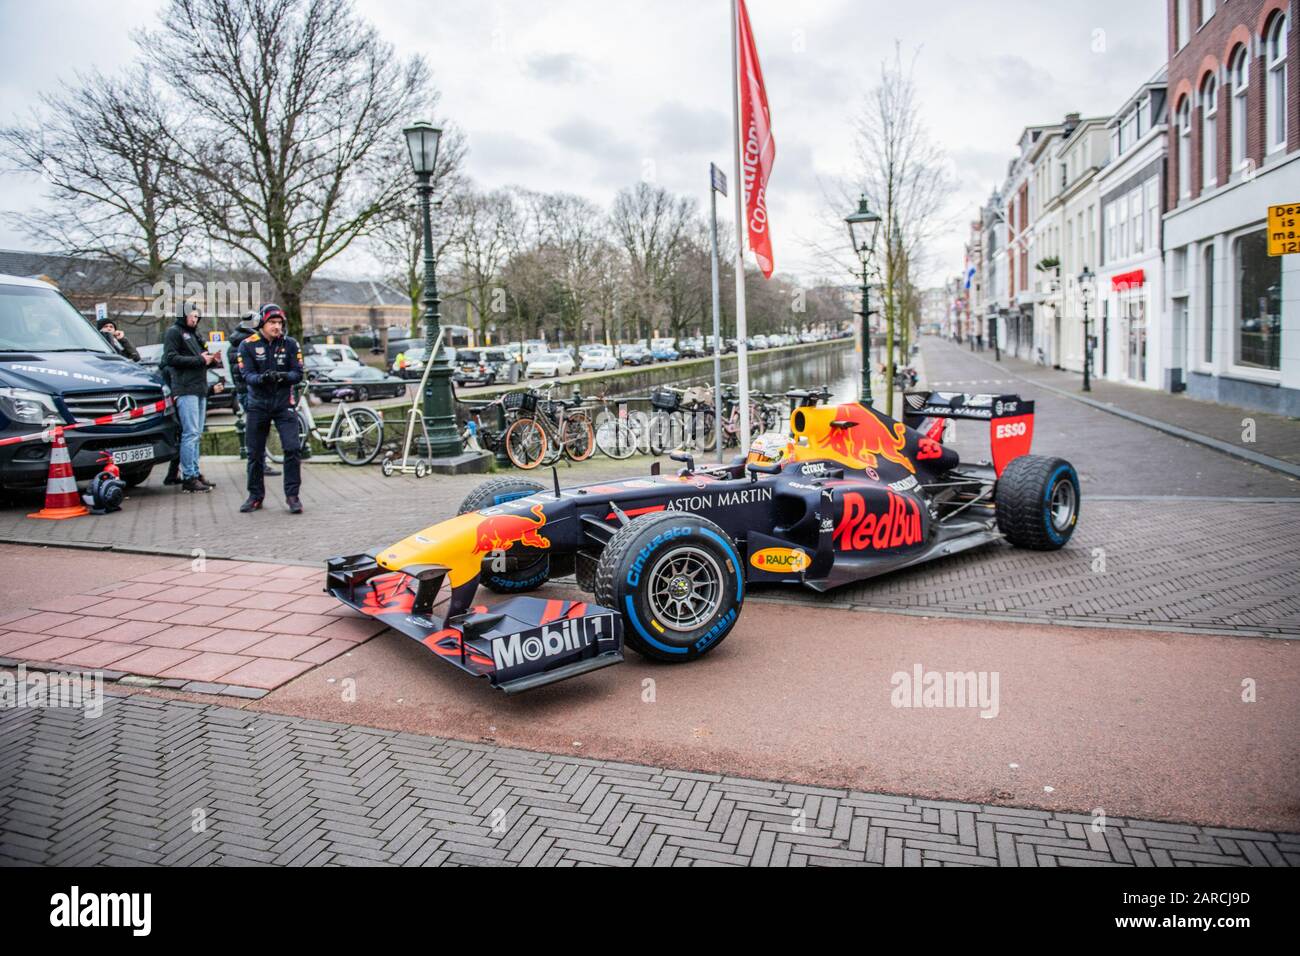 Den Haag, Netherlands. 27th Jan, 2020. DEN HAAG, 27-01-2020, Formula 1 cars from the Redbull Racing in the center of The Hague. is making a promovideo for the Formula 1